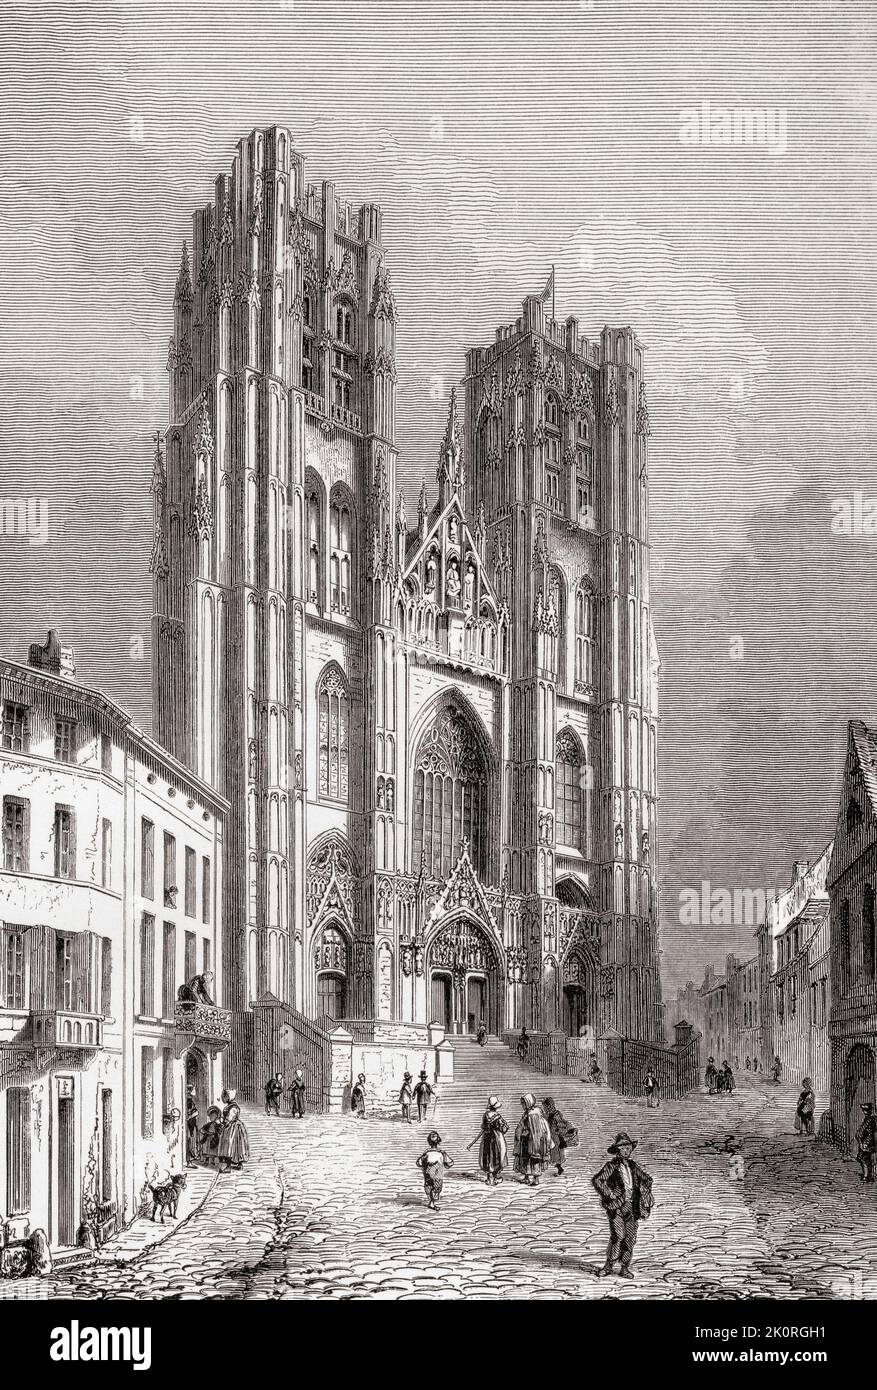 The Cathedral of St. Michael and St. Gudula, aka Cathedral of St. Gudula or St. Gudula, Brussels, Belgium, seen here in the 19th century.  Built 11th - 15th centuries it is of Gothic and Brabantine Gothic architectural style.  From Les Plus Belles Eglises du Monde, published 1861. Stock Photo